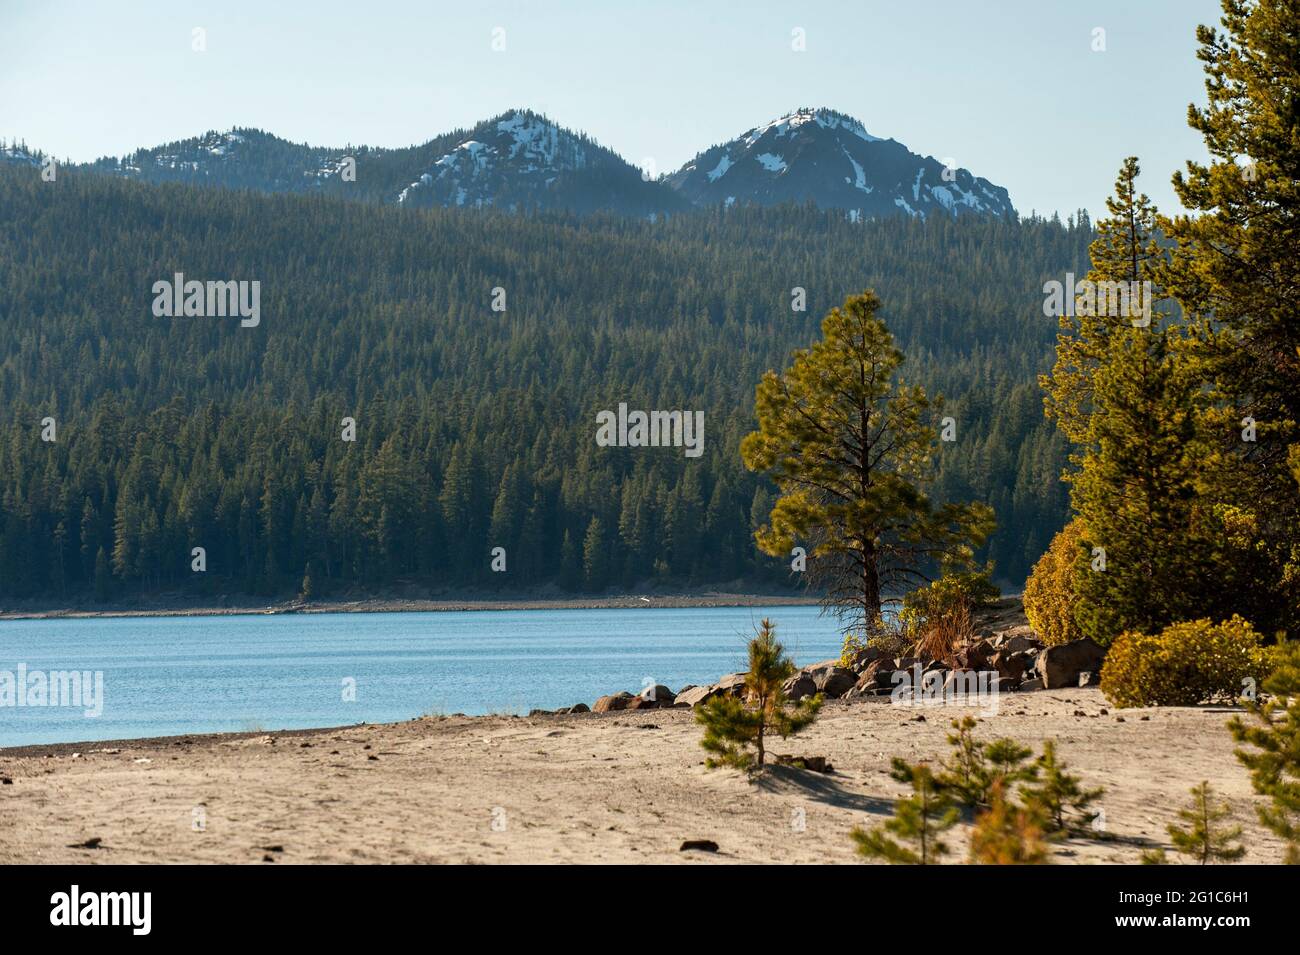 Simax Beach, on Crescent Lake in Klamath County, Oregon.  Lakeview Mountain in the distance. Stock Photo